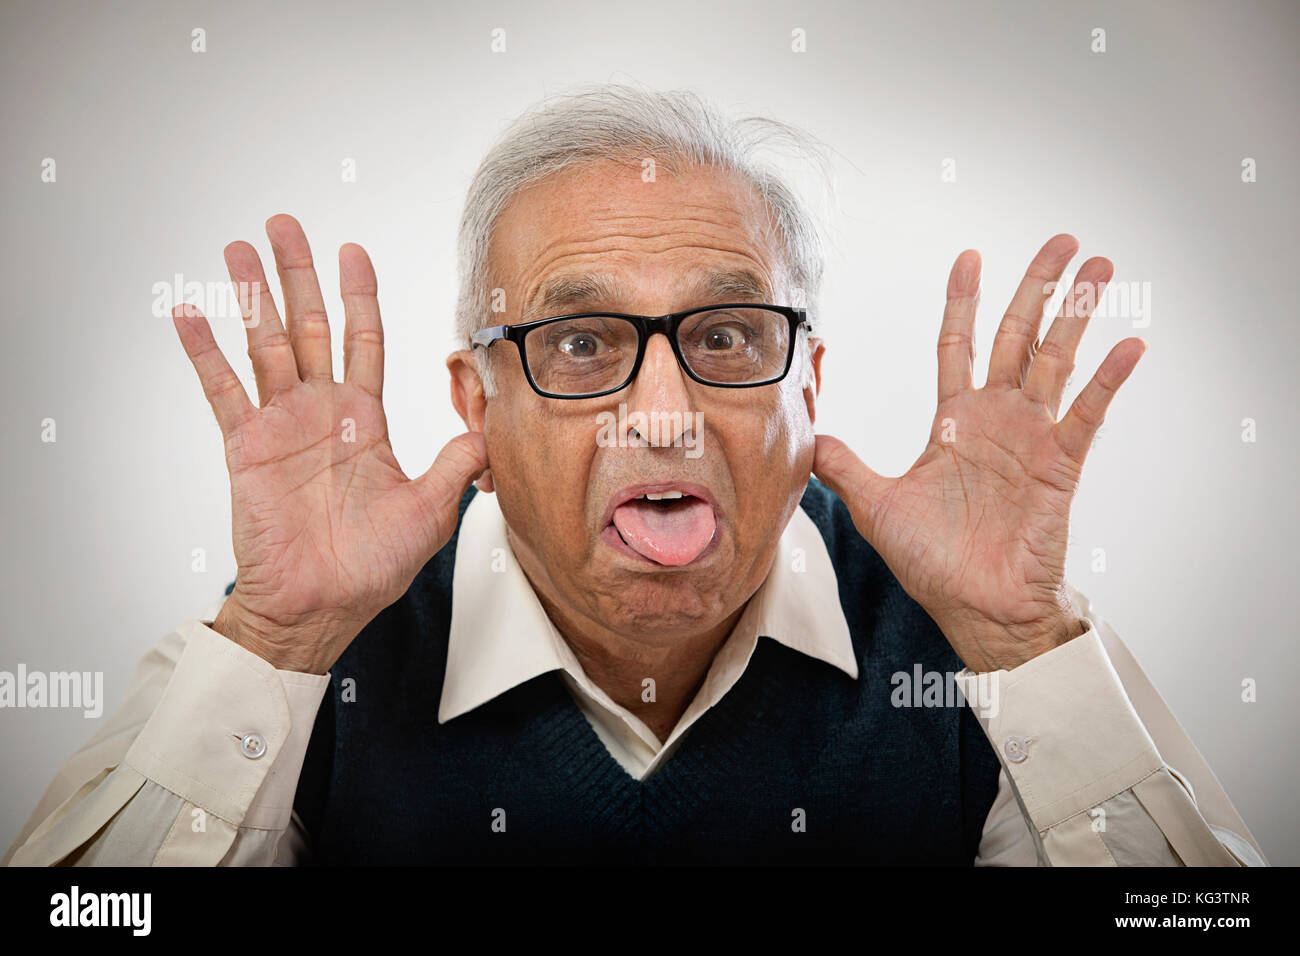 Senior man with hands in his ears and tongue sticking out making a funny face Stock Photo